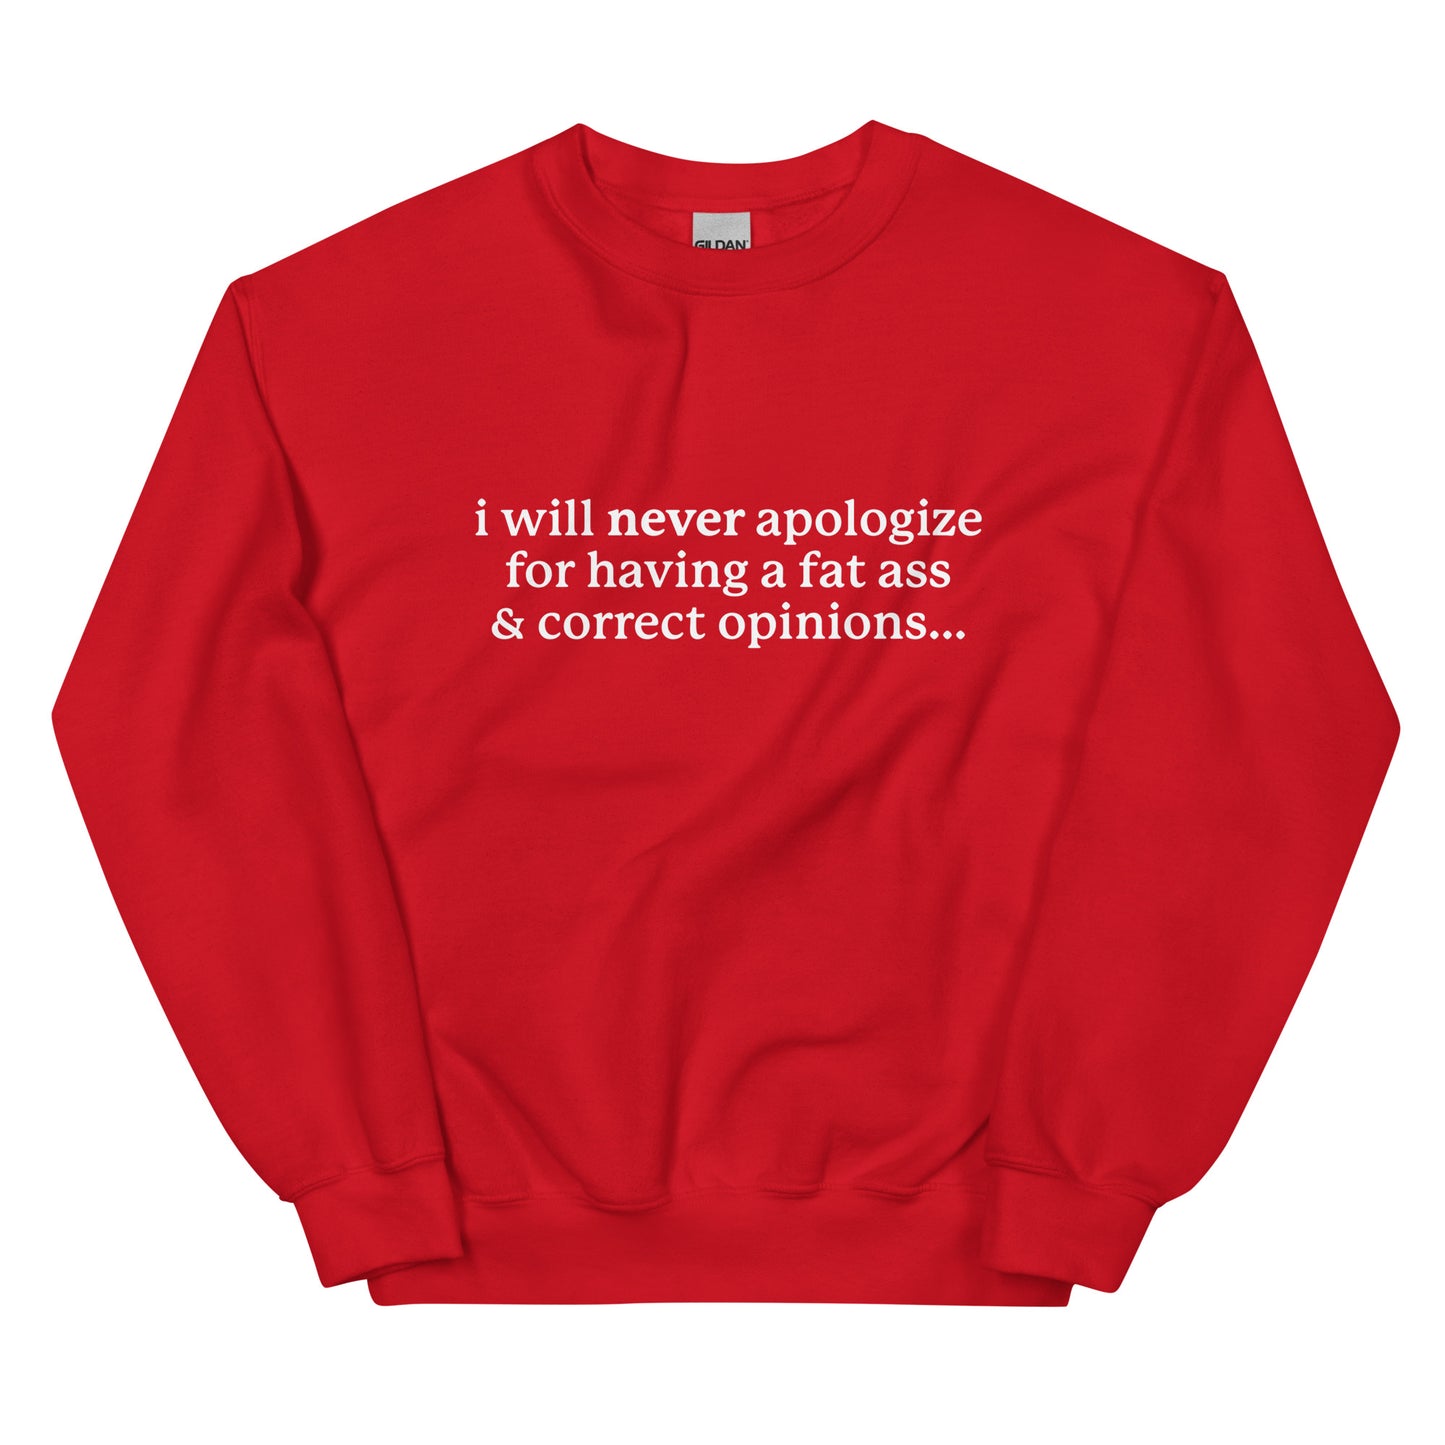 I Will Never Apologize (Fat Ass & Correct Opinions) Unisex Sweatshirt